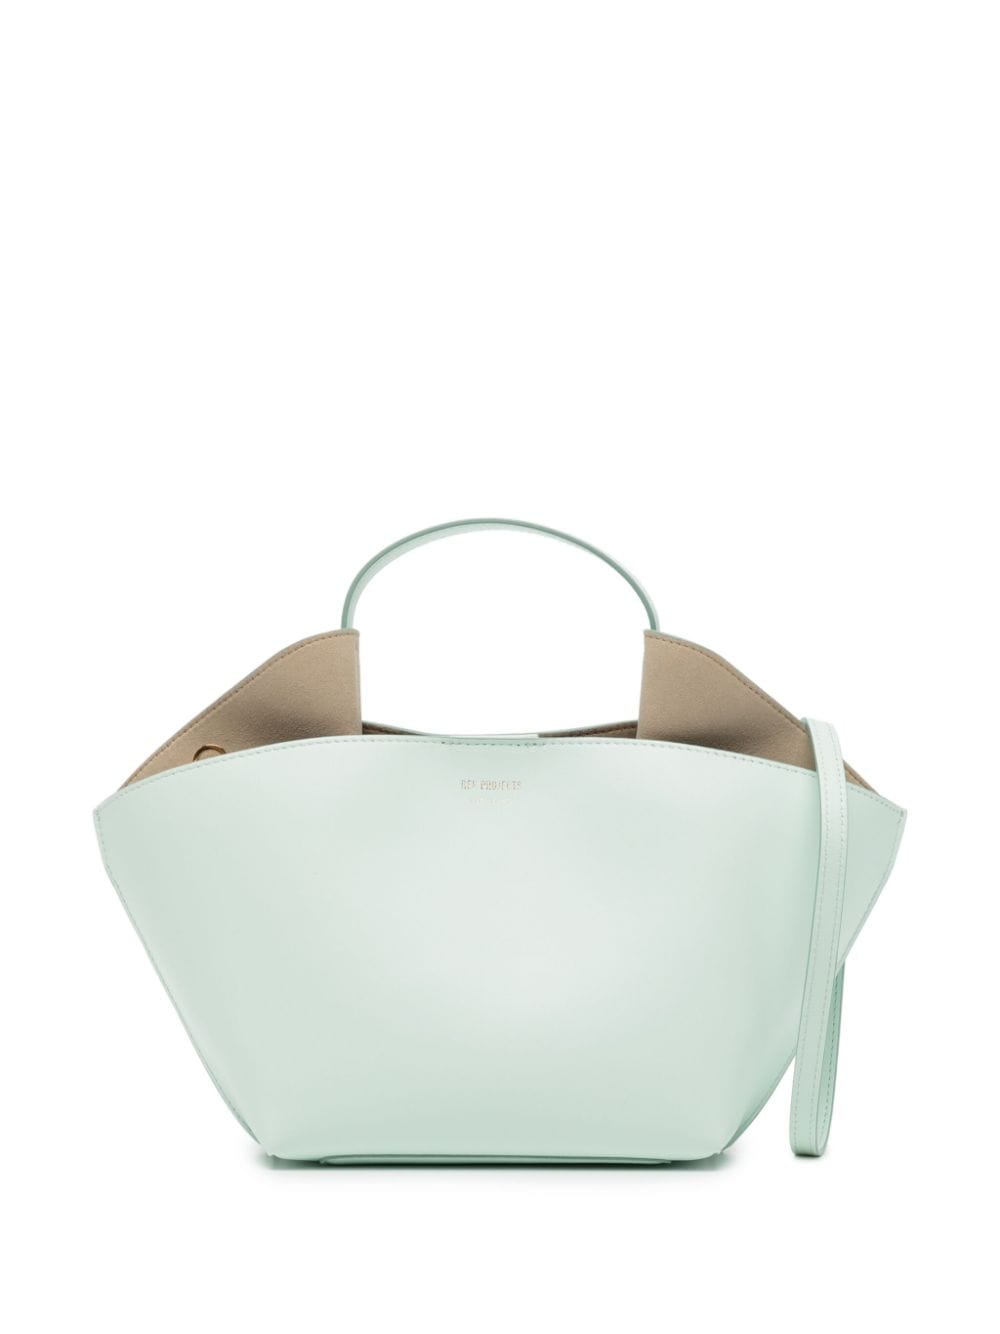 REE PROJECTS Ann leather mini bag - Green von REE PROJECTS